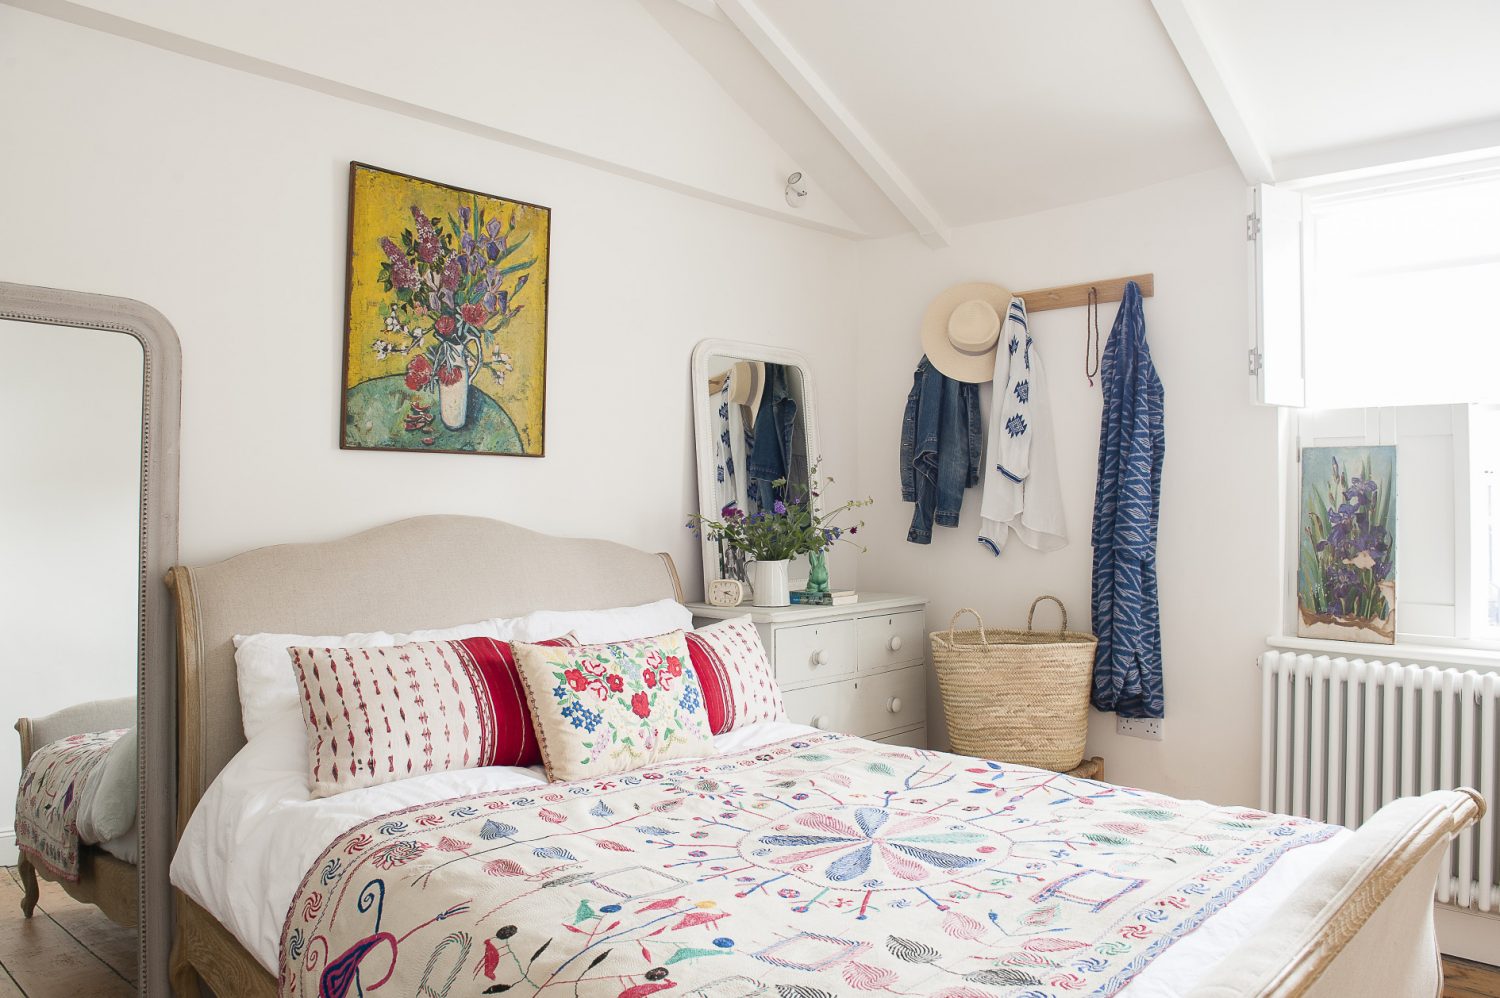 Helen’s bedroom is a gloriously pared back ‘homage to a Greek bedroom’, with white walls and shutters, a bed by Loaf, an Indian quilt and Romanian cushion and paintings from a fellow Norman Road trader